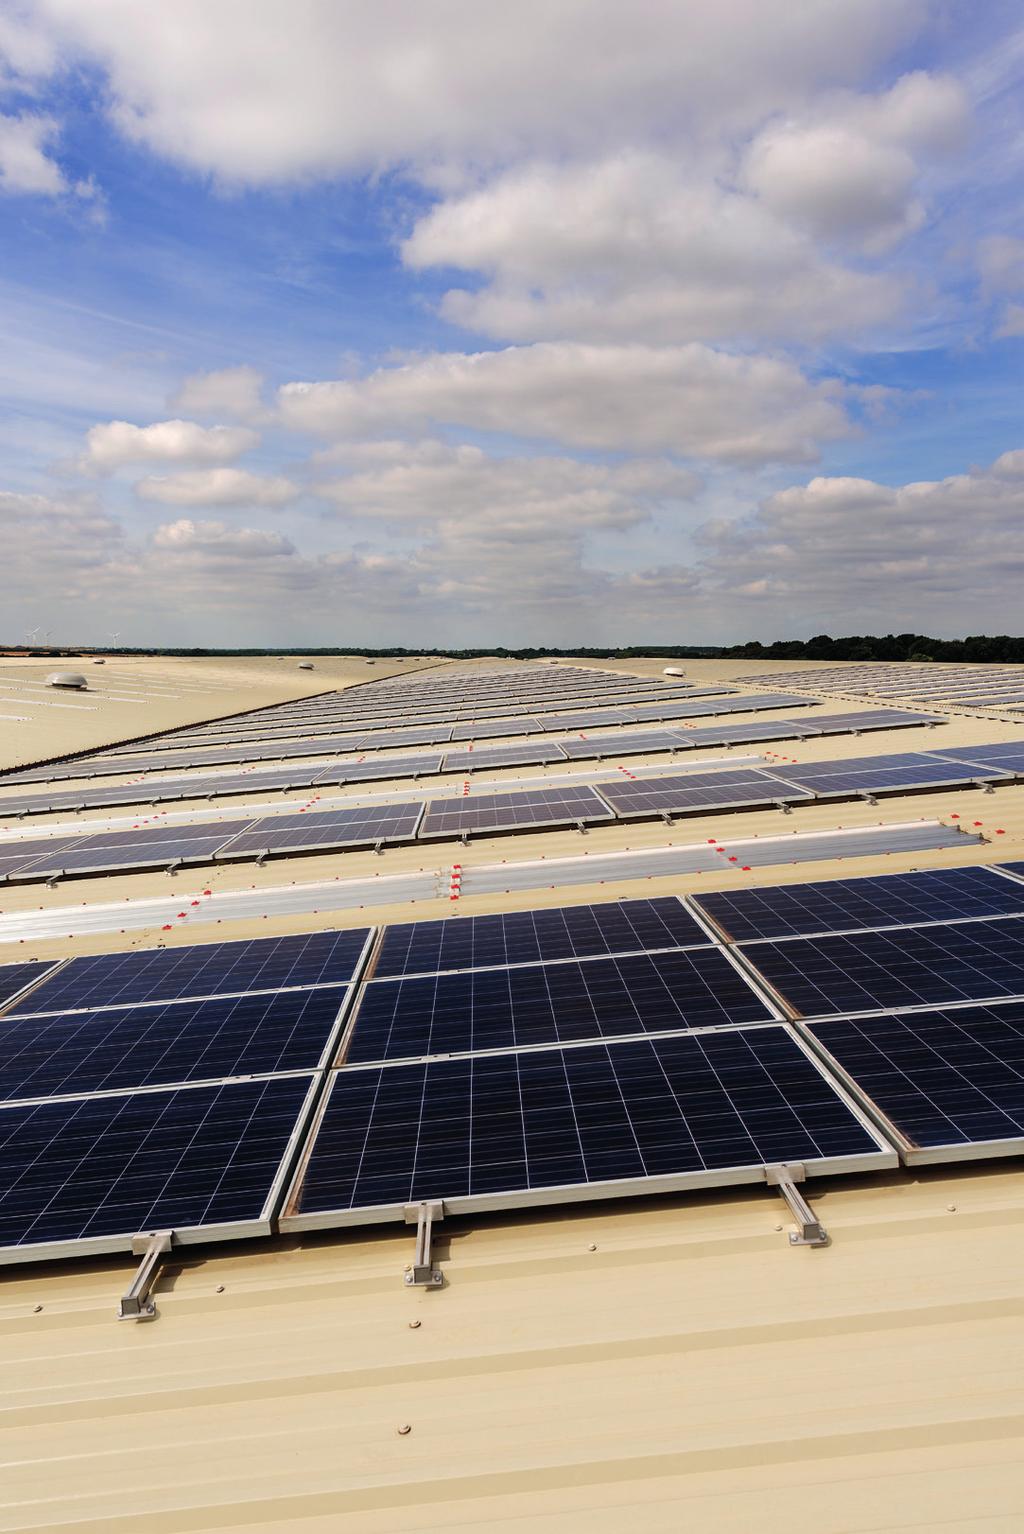 Distribution Case Study 9 Illuminate and Generate Kingspan Day-Lite solutions and Rooftop Solar PV were incorporated into the roof system, making the most of the vast surface area.